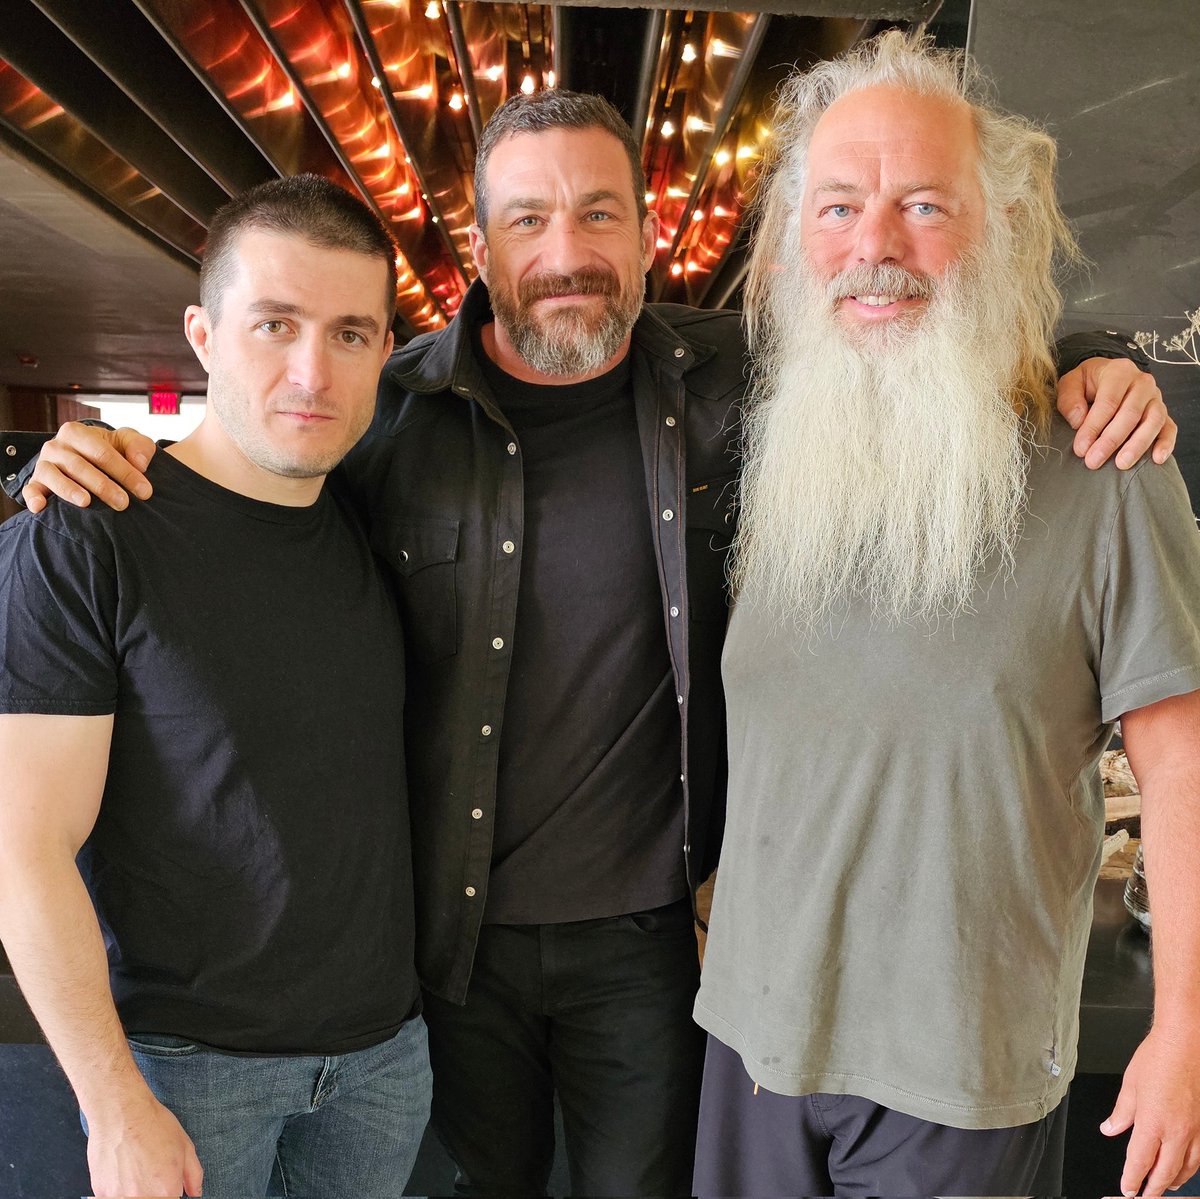 The band is back together again! 🤣 Two of my favorite humans on Earth. @hubermanlab & @RickRubin